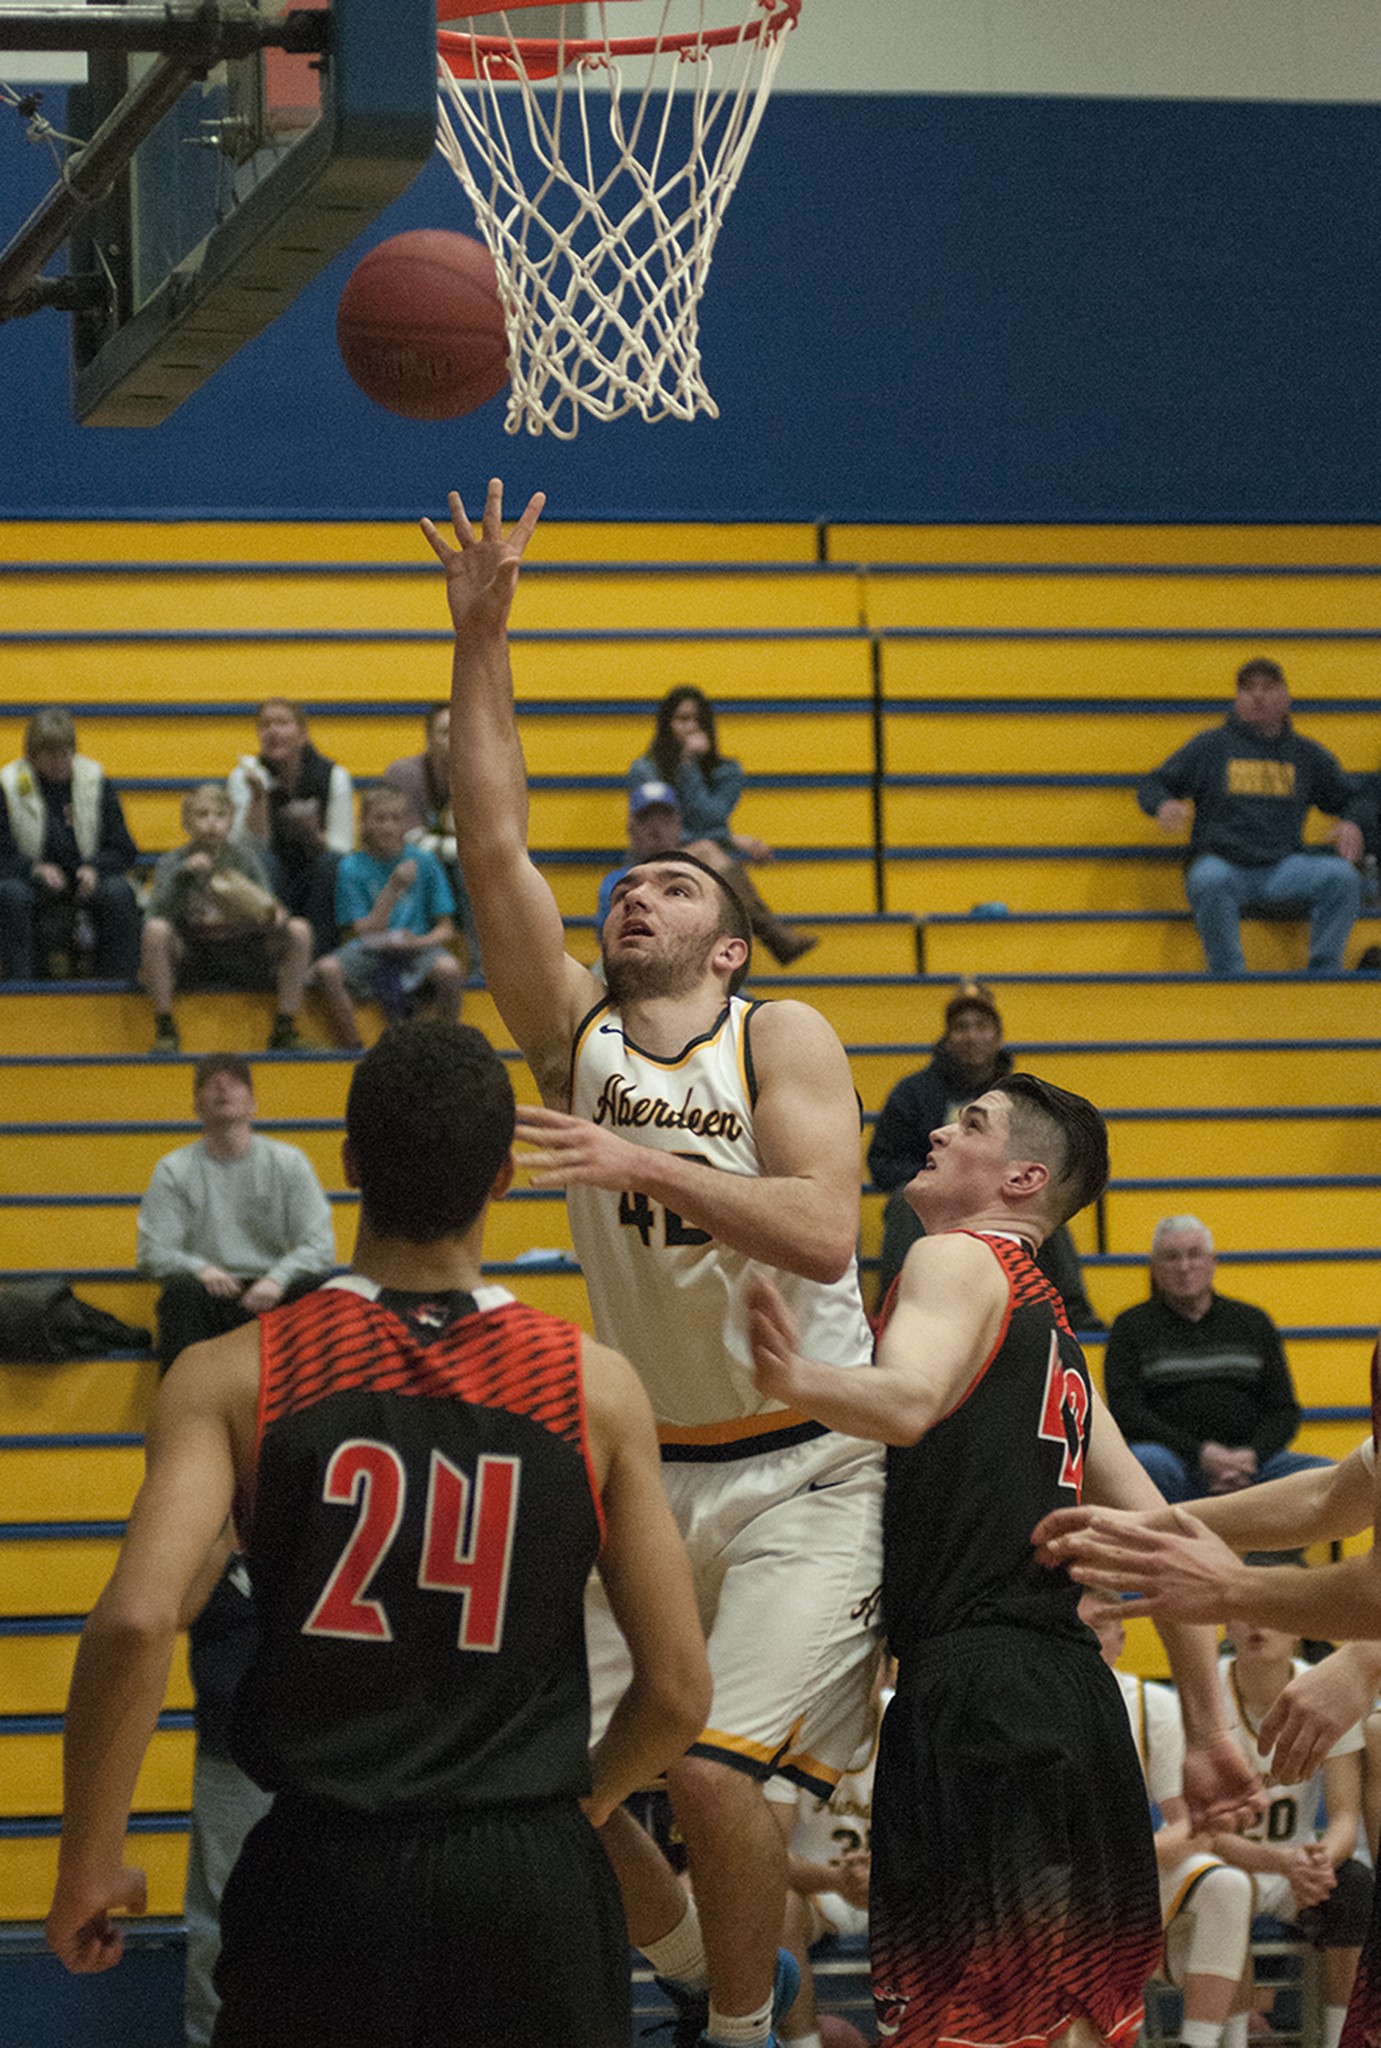 (Brendan Carl | The Daily World) Aberdeen’s Braden Castleberry-Taylor puts up a layin against Centralia during an Evergreen 2A Conference game at Sam Benn Gym on Wednesday.